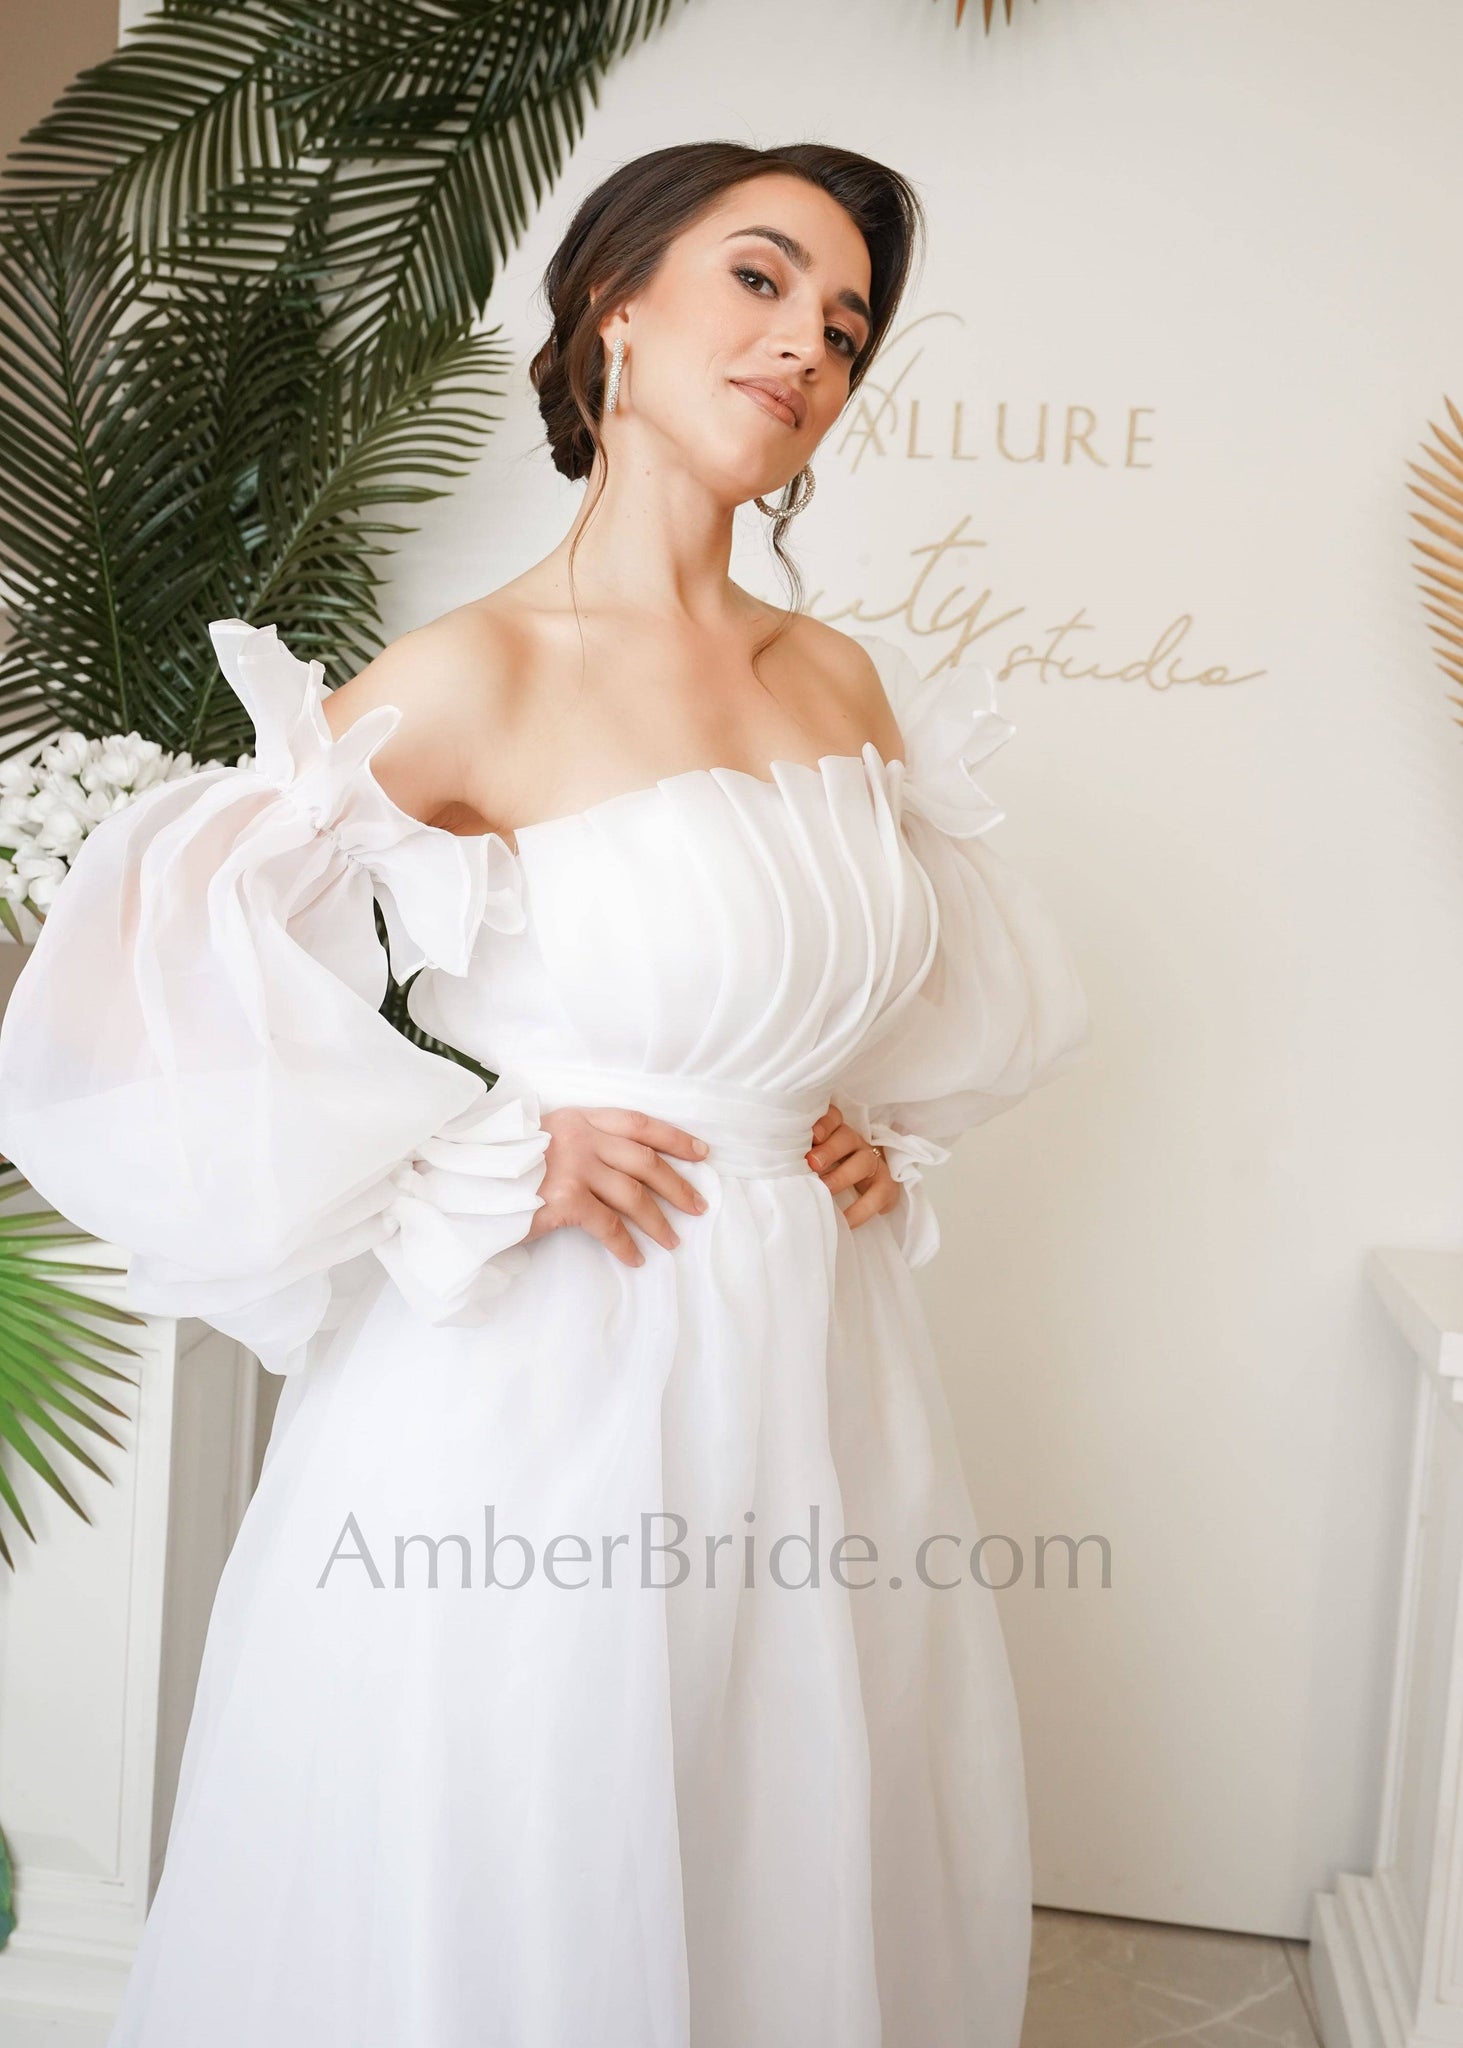 Exclusive A Line Strapless Attachable Sleeve Organza Wedding Dress - AmberBride